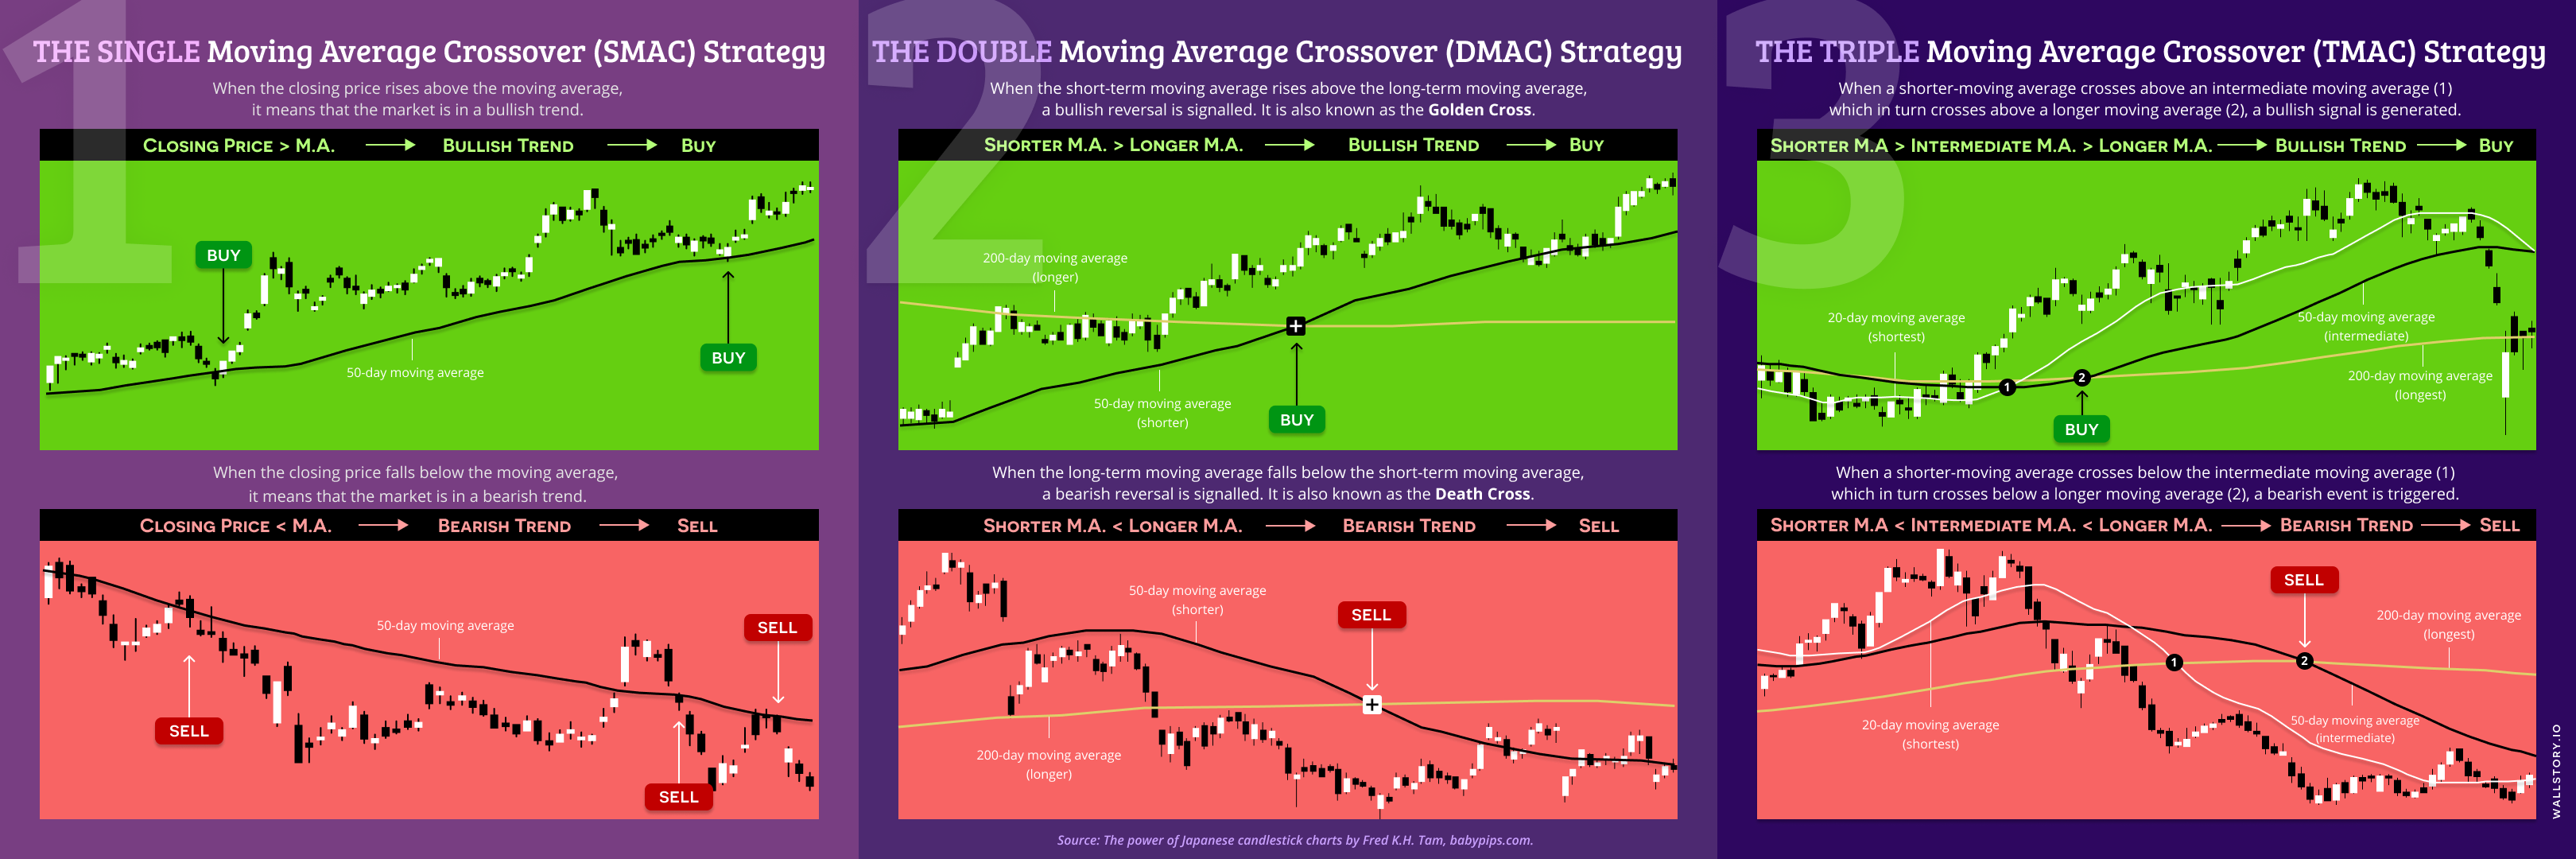 Double Moving Average Crossover Strategy, The